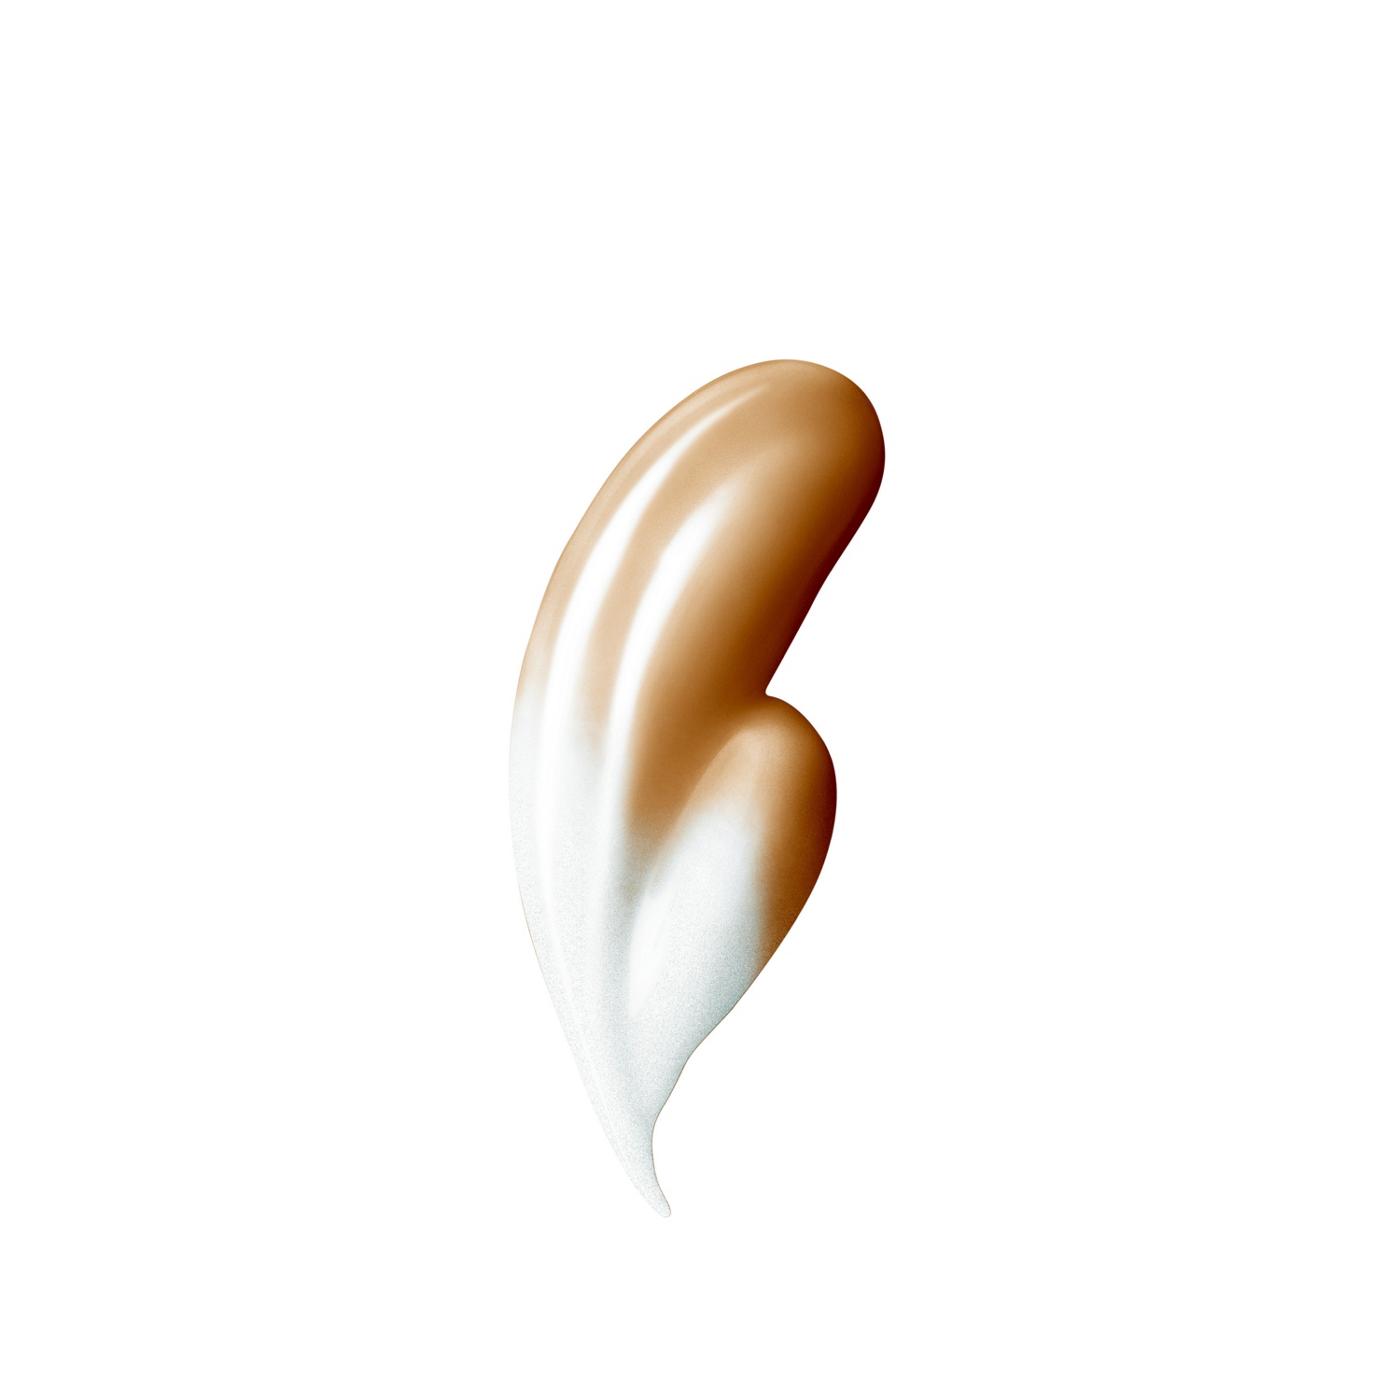 L'Oréal Paris Magic Skin Beautifier BB Cream for Face with Vitamin C and E - Deep; image 2 of 3